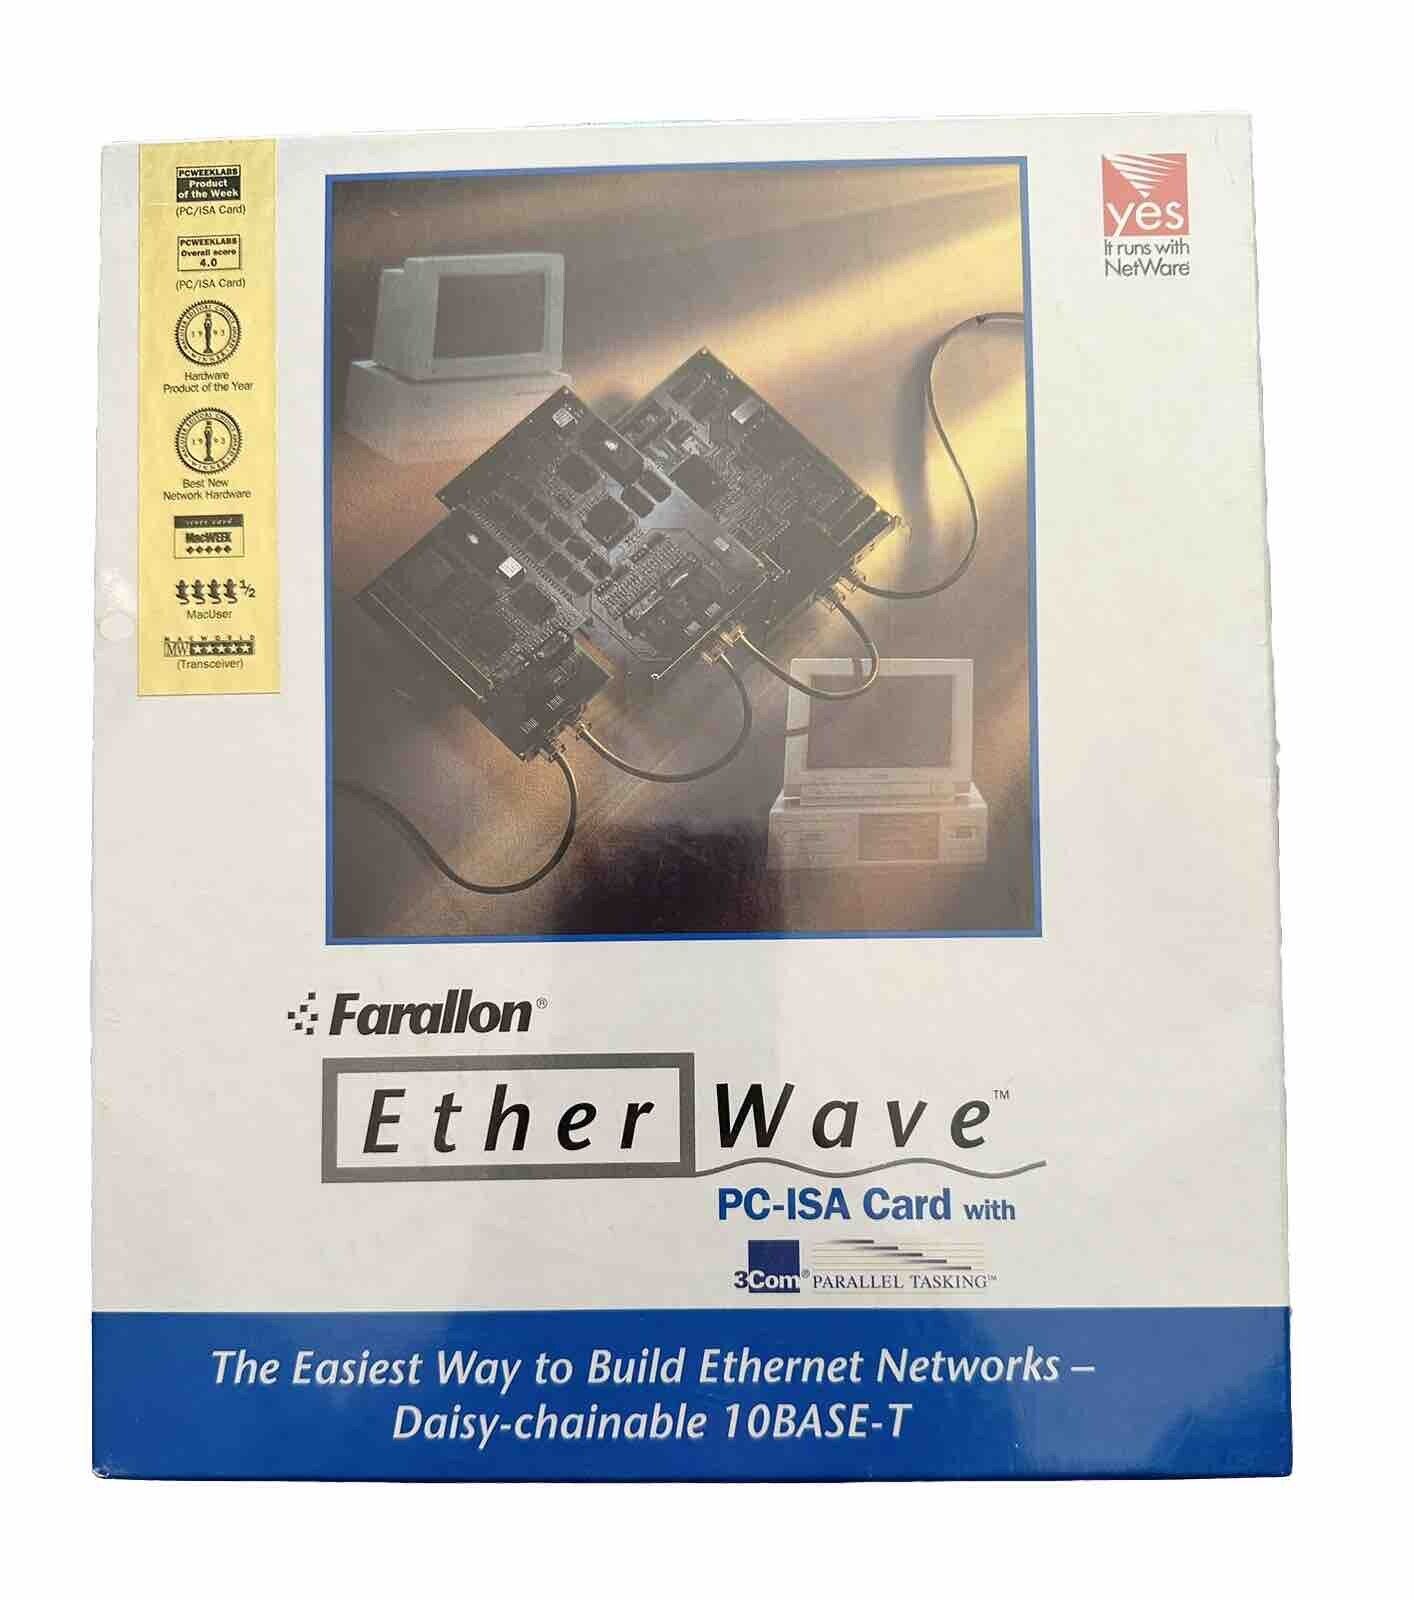 Rare New Vintage 1993 Farallon EtherWave PC-ISA Card with 3Com Parallel Tasking